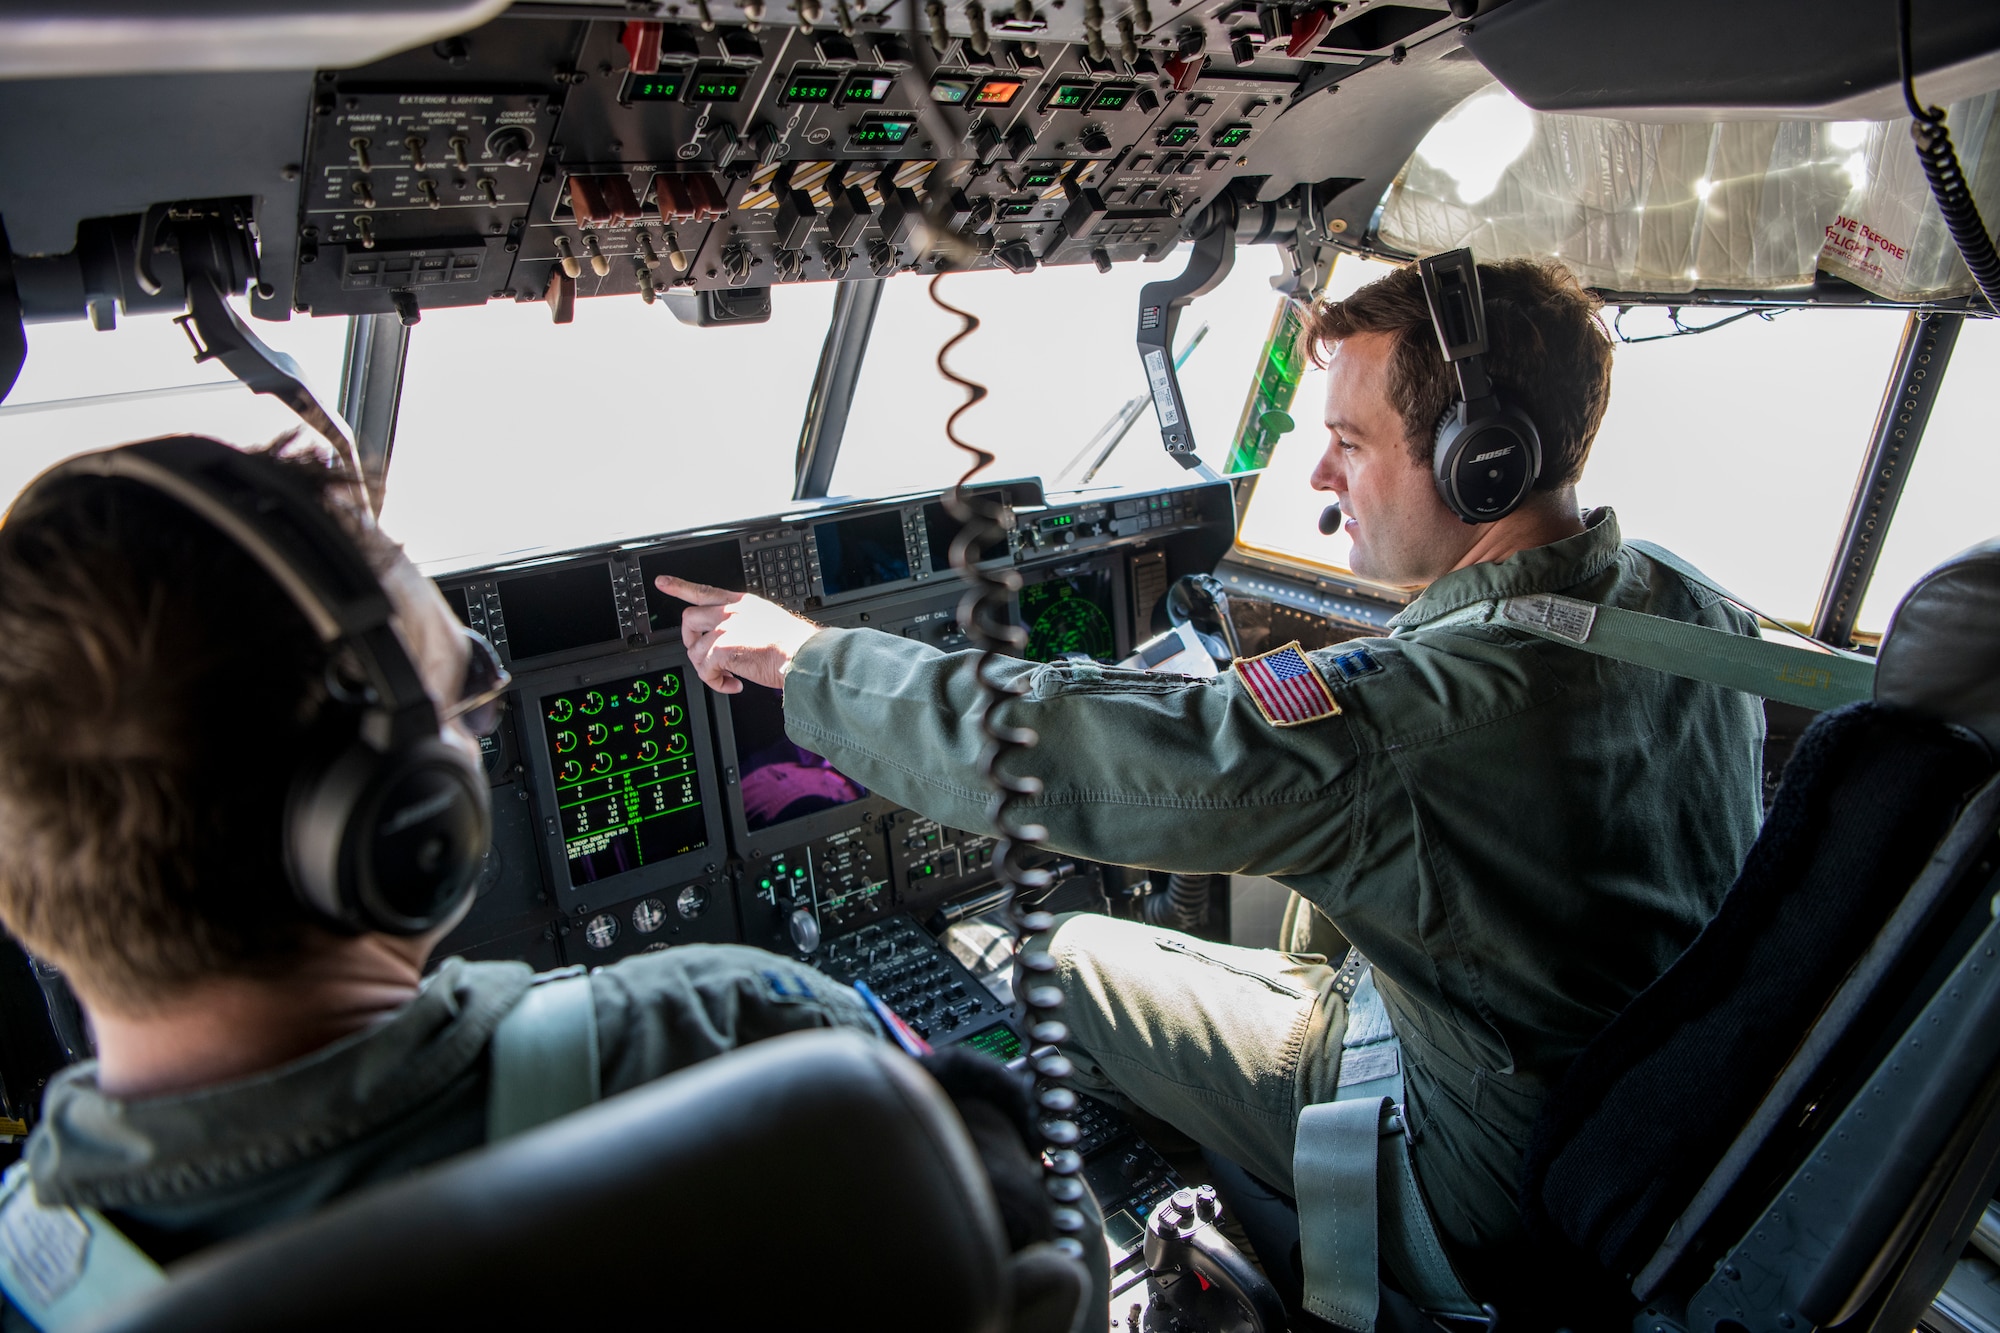 Capt. Forrest Heintz, 53rd Weather Reconnaissance Squadron pilot, programs radio frequencies prior to take off, June 15 at Keesler Air Force Base, Miss.  The Hurricane Hunters deployed to St. Croix to fly training missions over the Caribbean in preparation for the 2020 hurricane season. (U.S. Air Force photo by Tech. Sgt. Christopher Carranza)